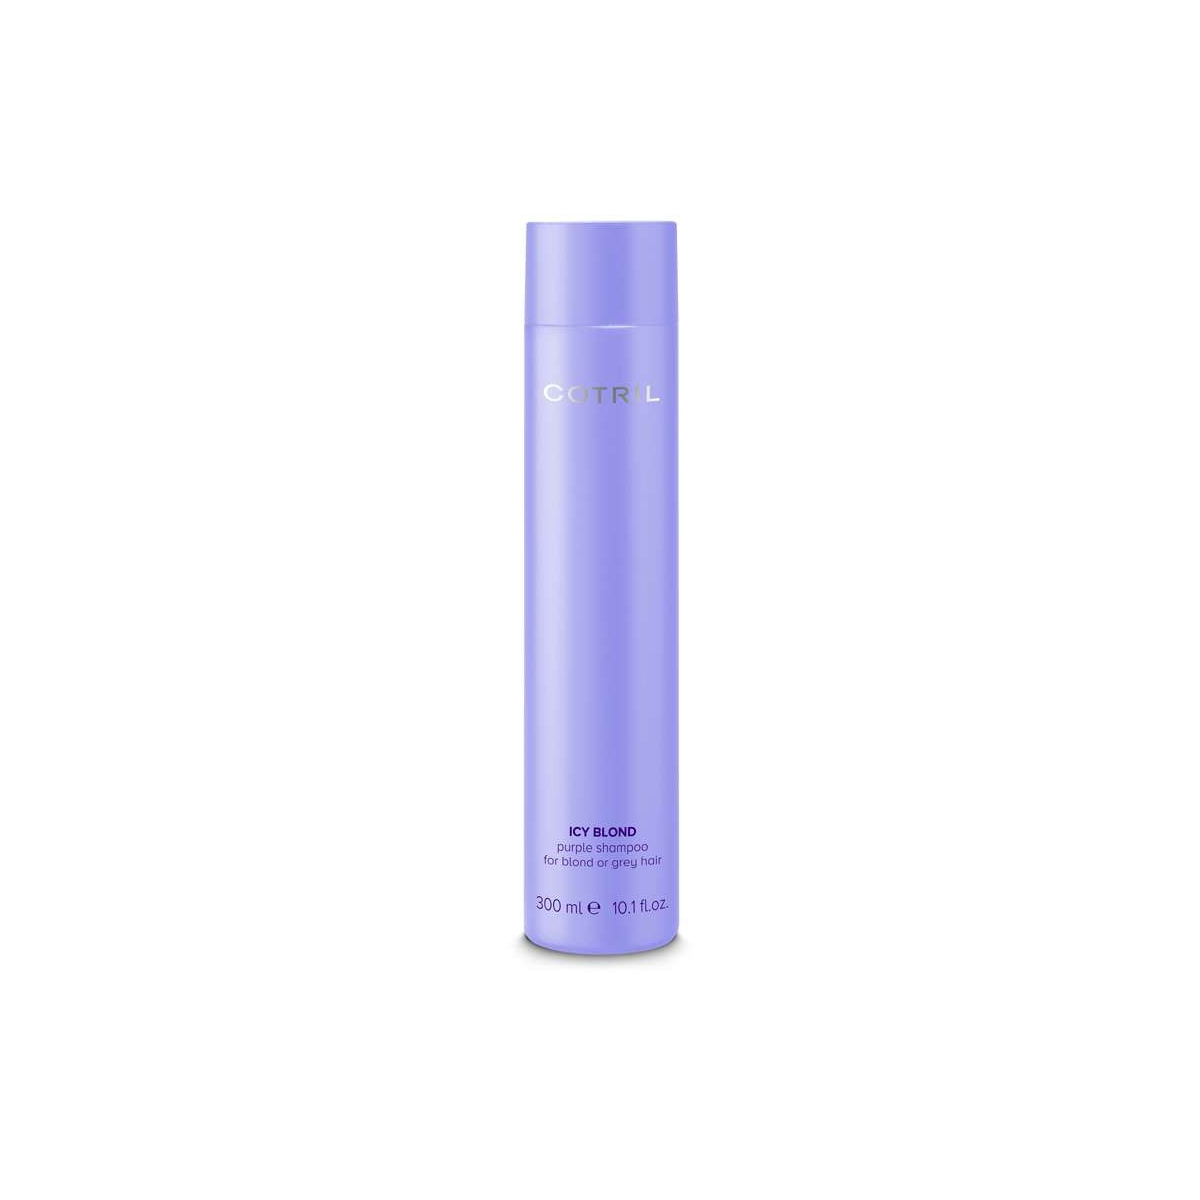 COTRIL - ICY BLOND PURPLE SHAMPOO (300ml) Shampoo uso frequente